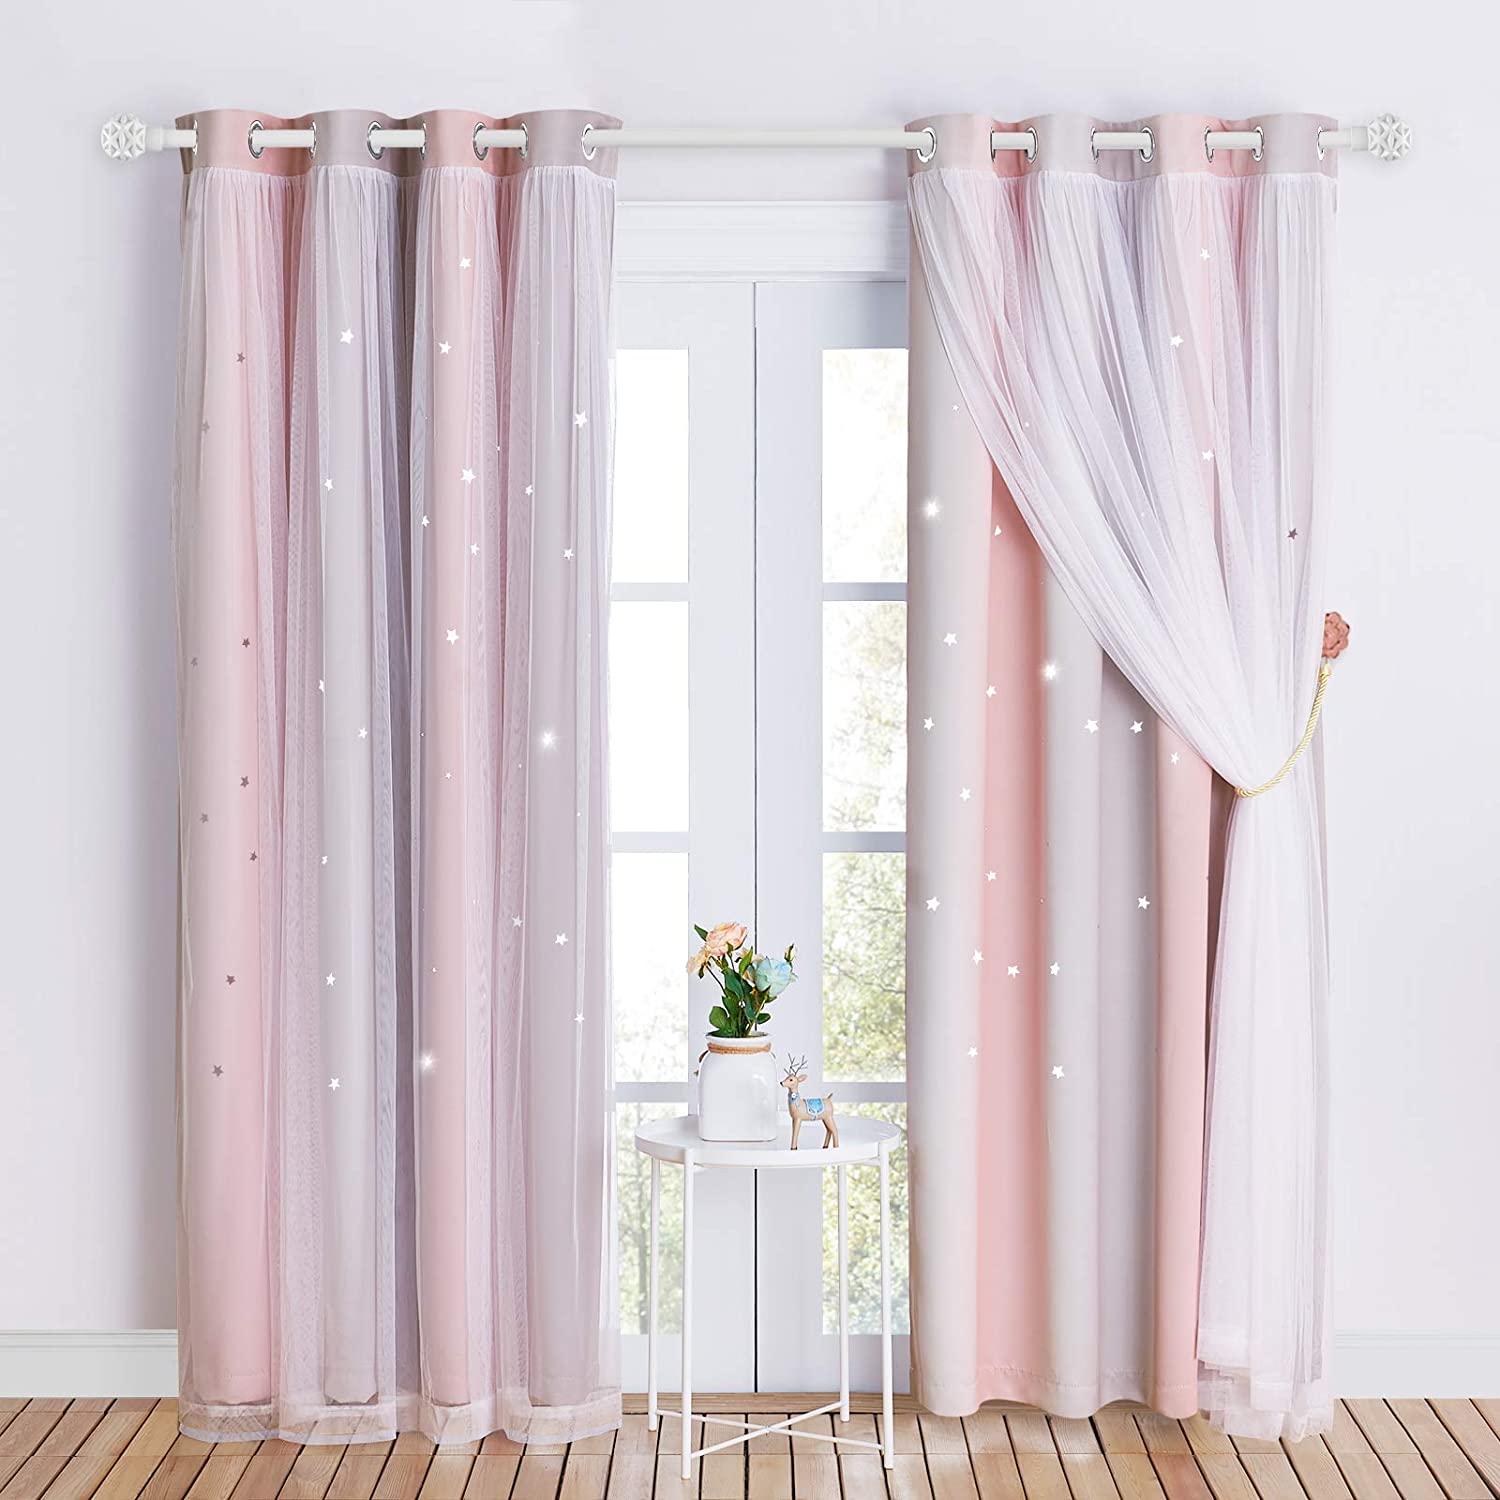 Star Cut Out Blackout Curtains With Sheer Curtain Overlay 1 Panel